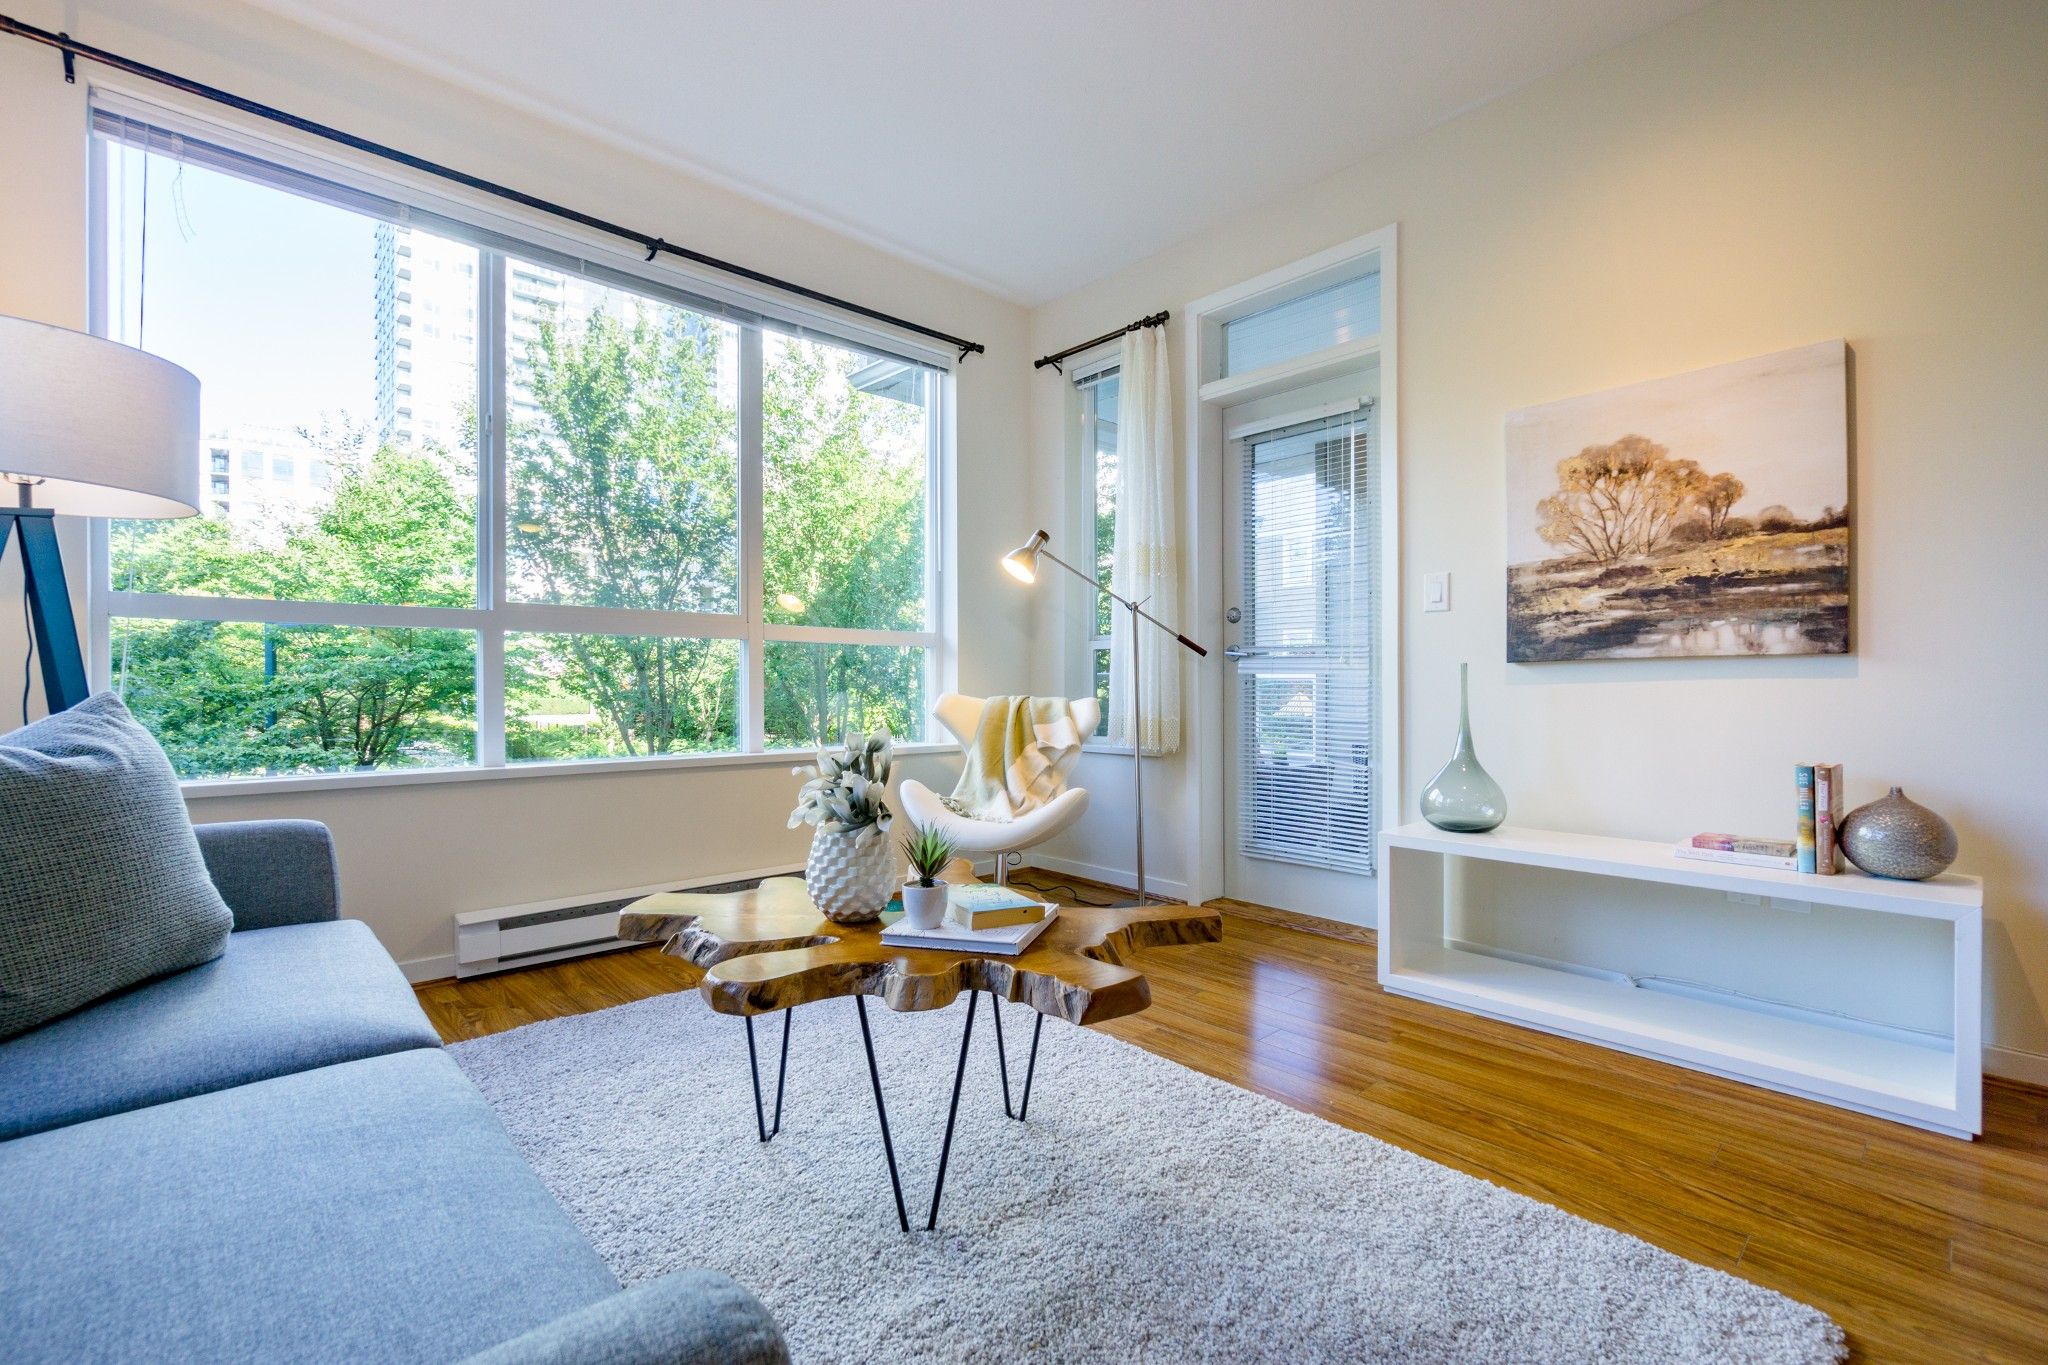 Main Photo: 208 3551 FOSTER Avenue in Vancouver: Collingwood VE Condo for sale (Vancouver East)  : MLS®# R2291555